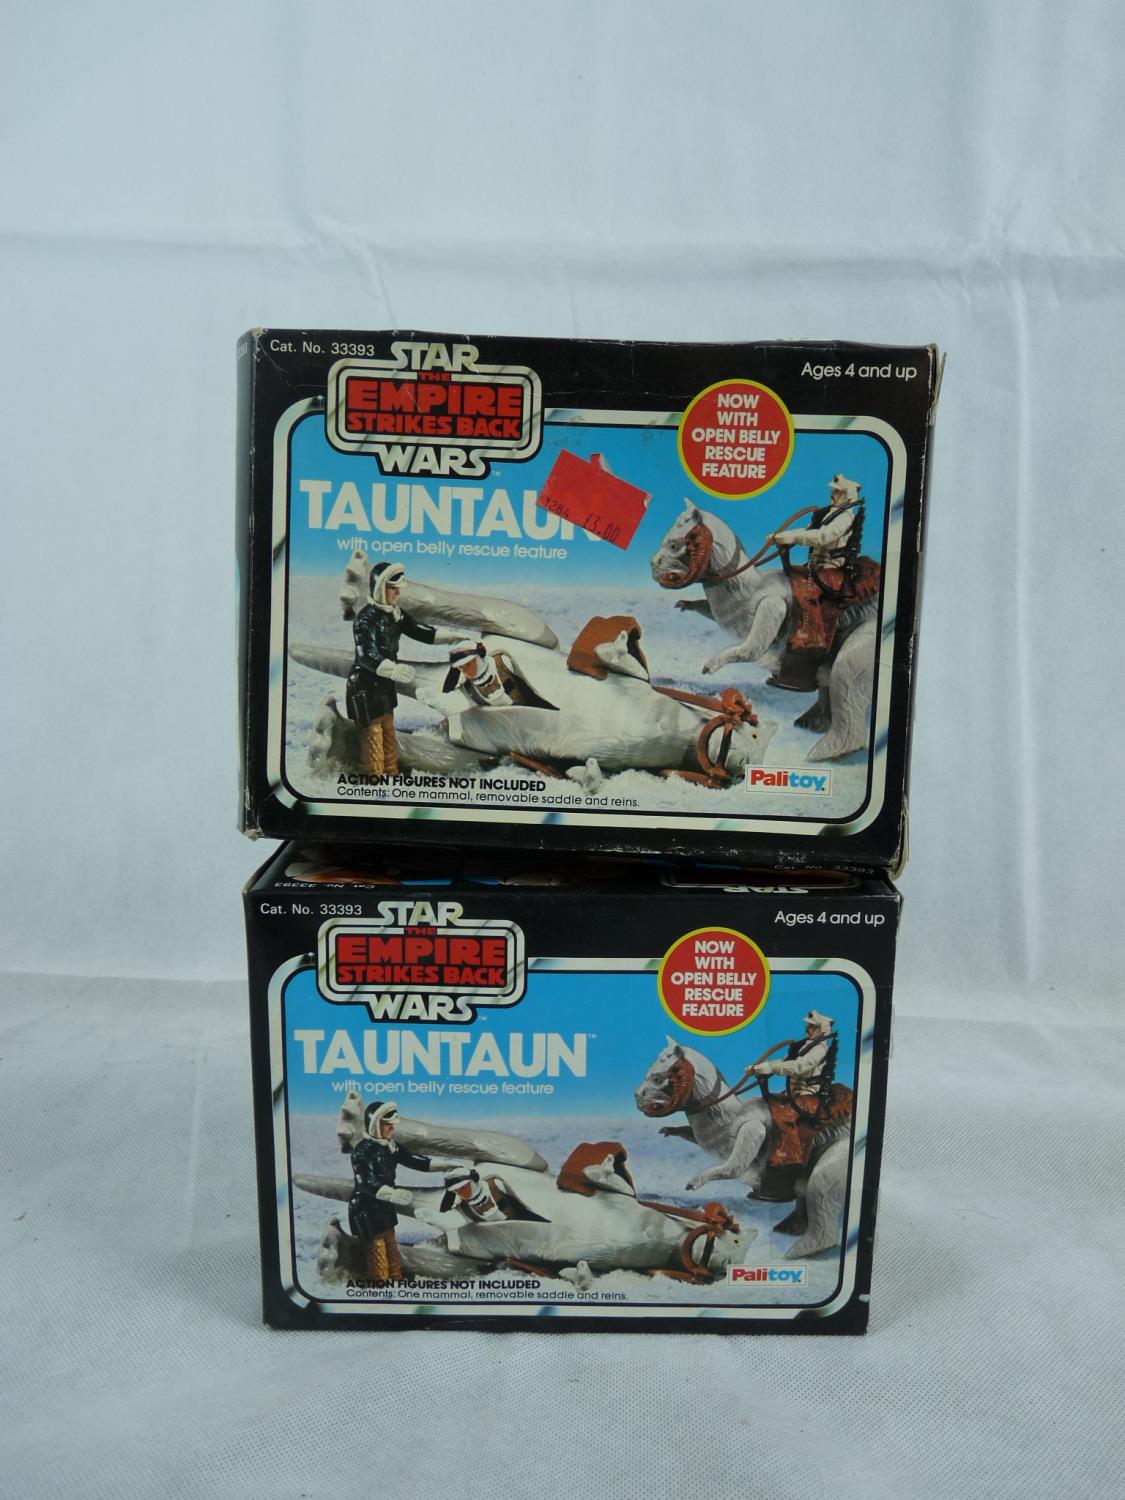 2 Star Wars The Empire Strikes Back Tauntaun with open belly rescue feature by Palitoy